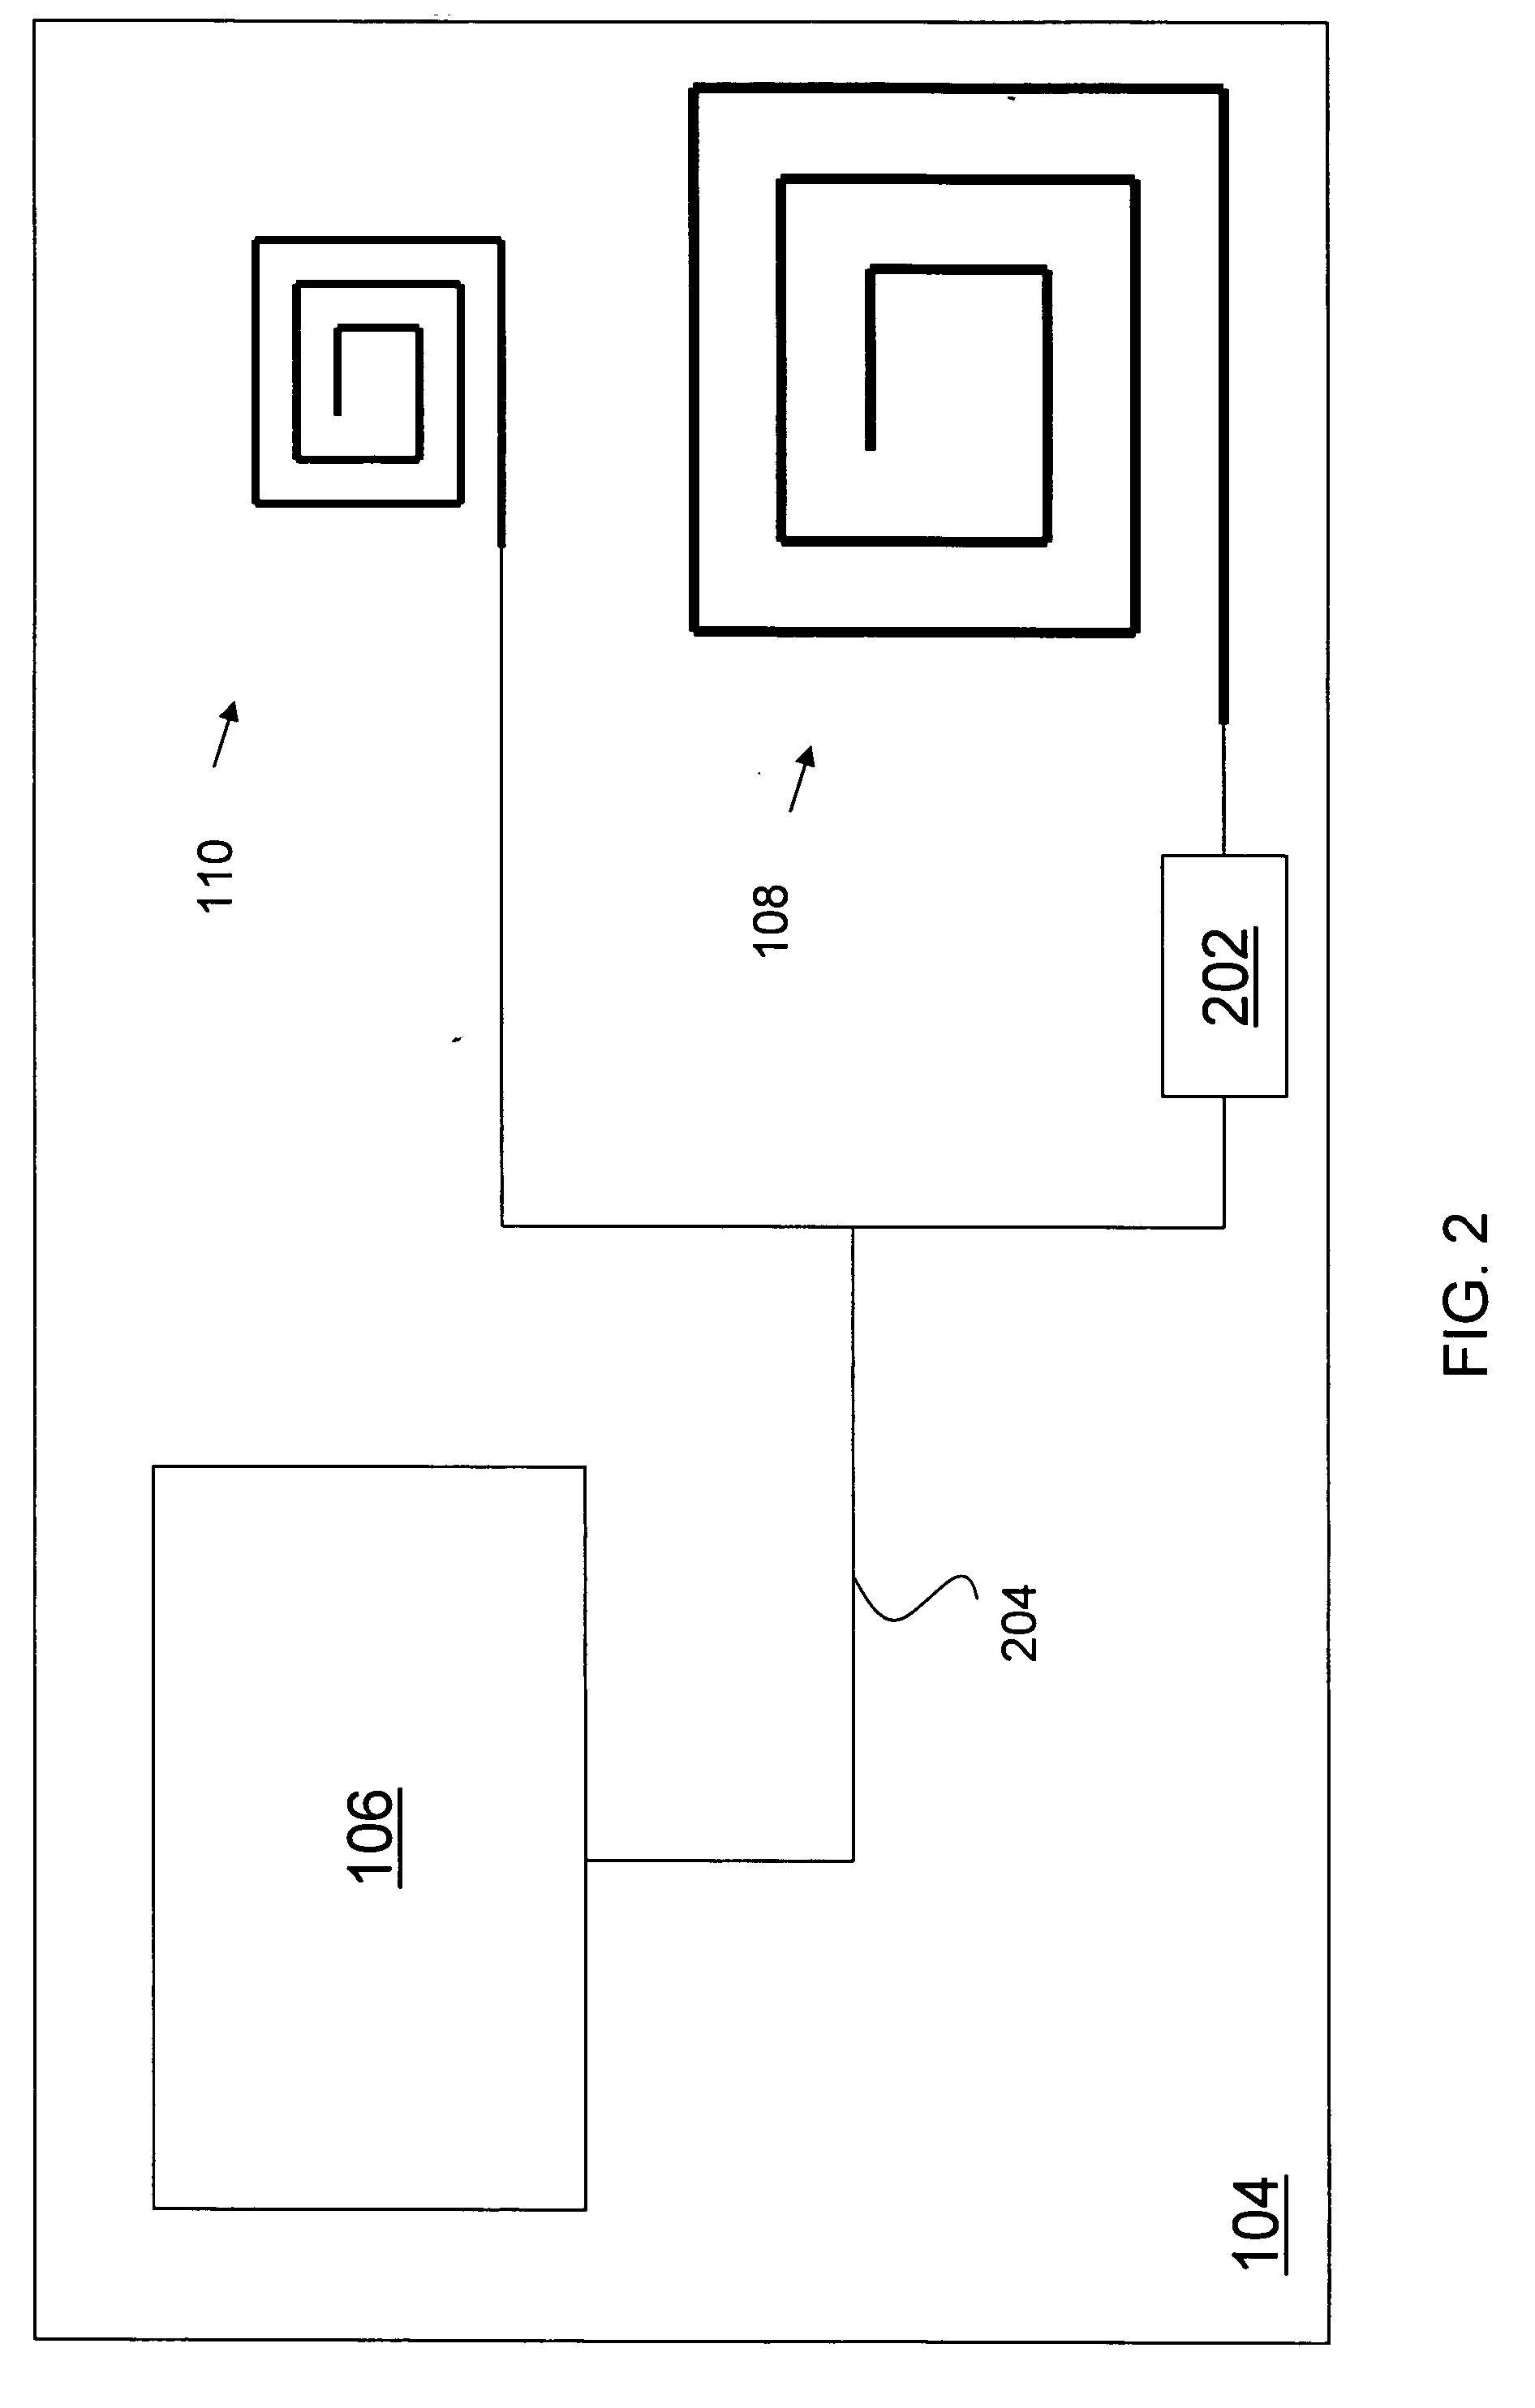 Method and apparatus for tag with adjustable read distance